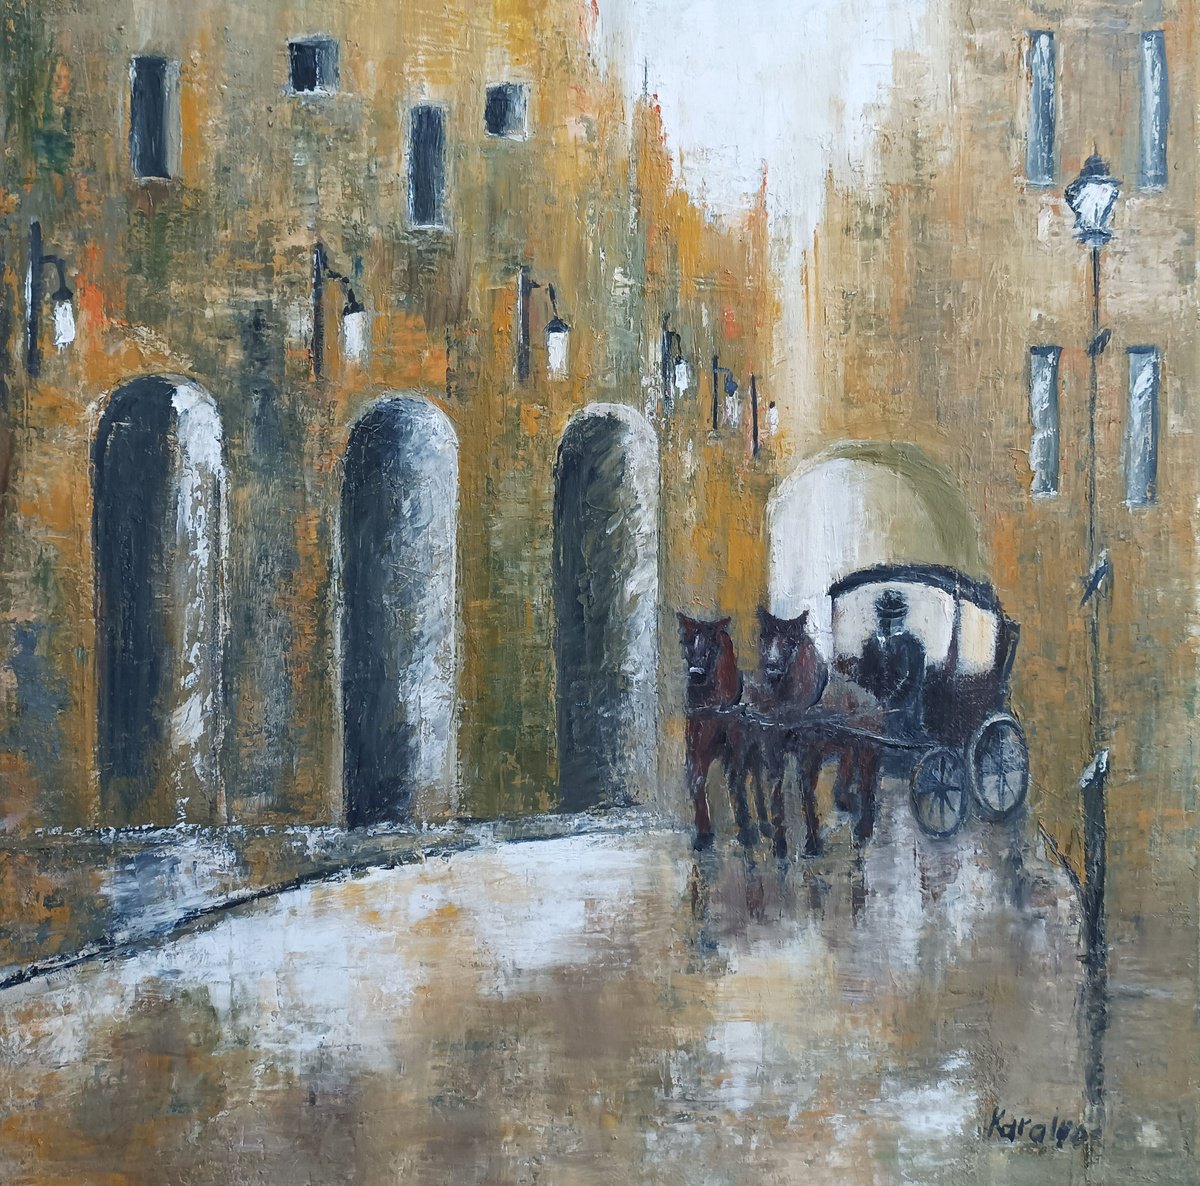 A carriage on the street by Maria Karalyos